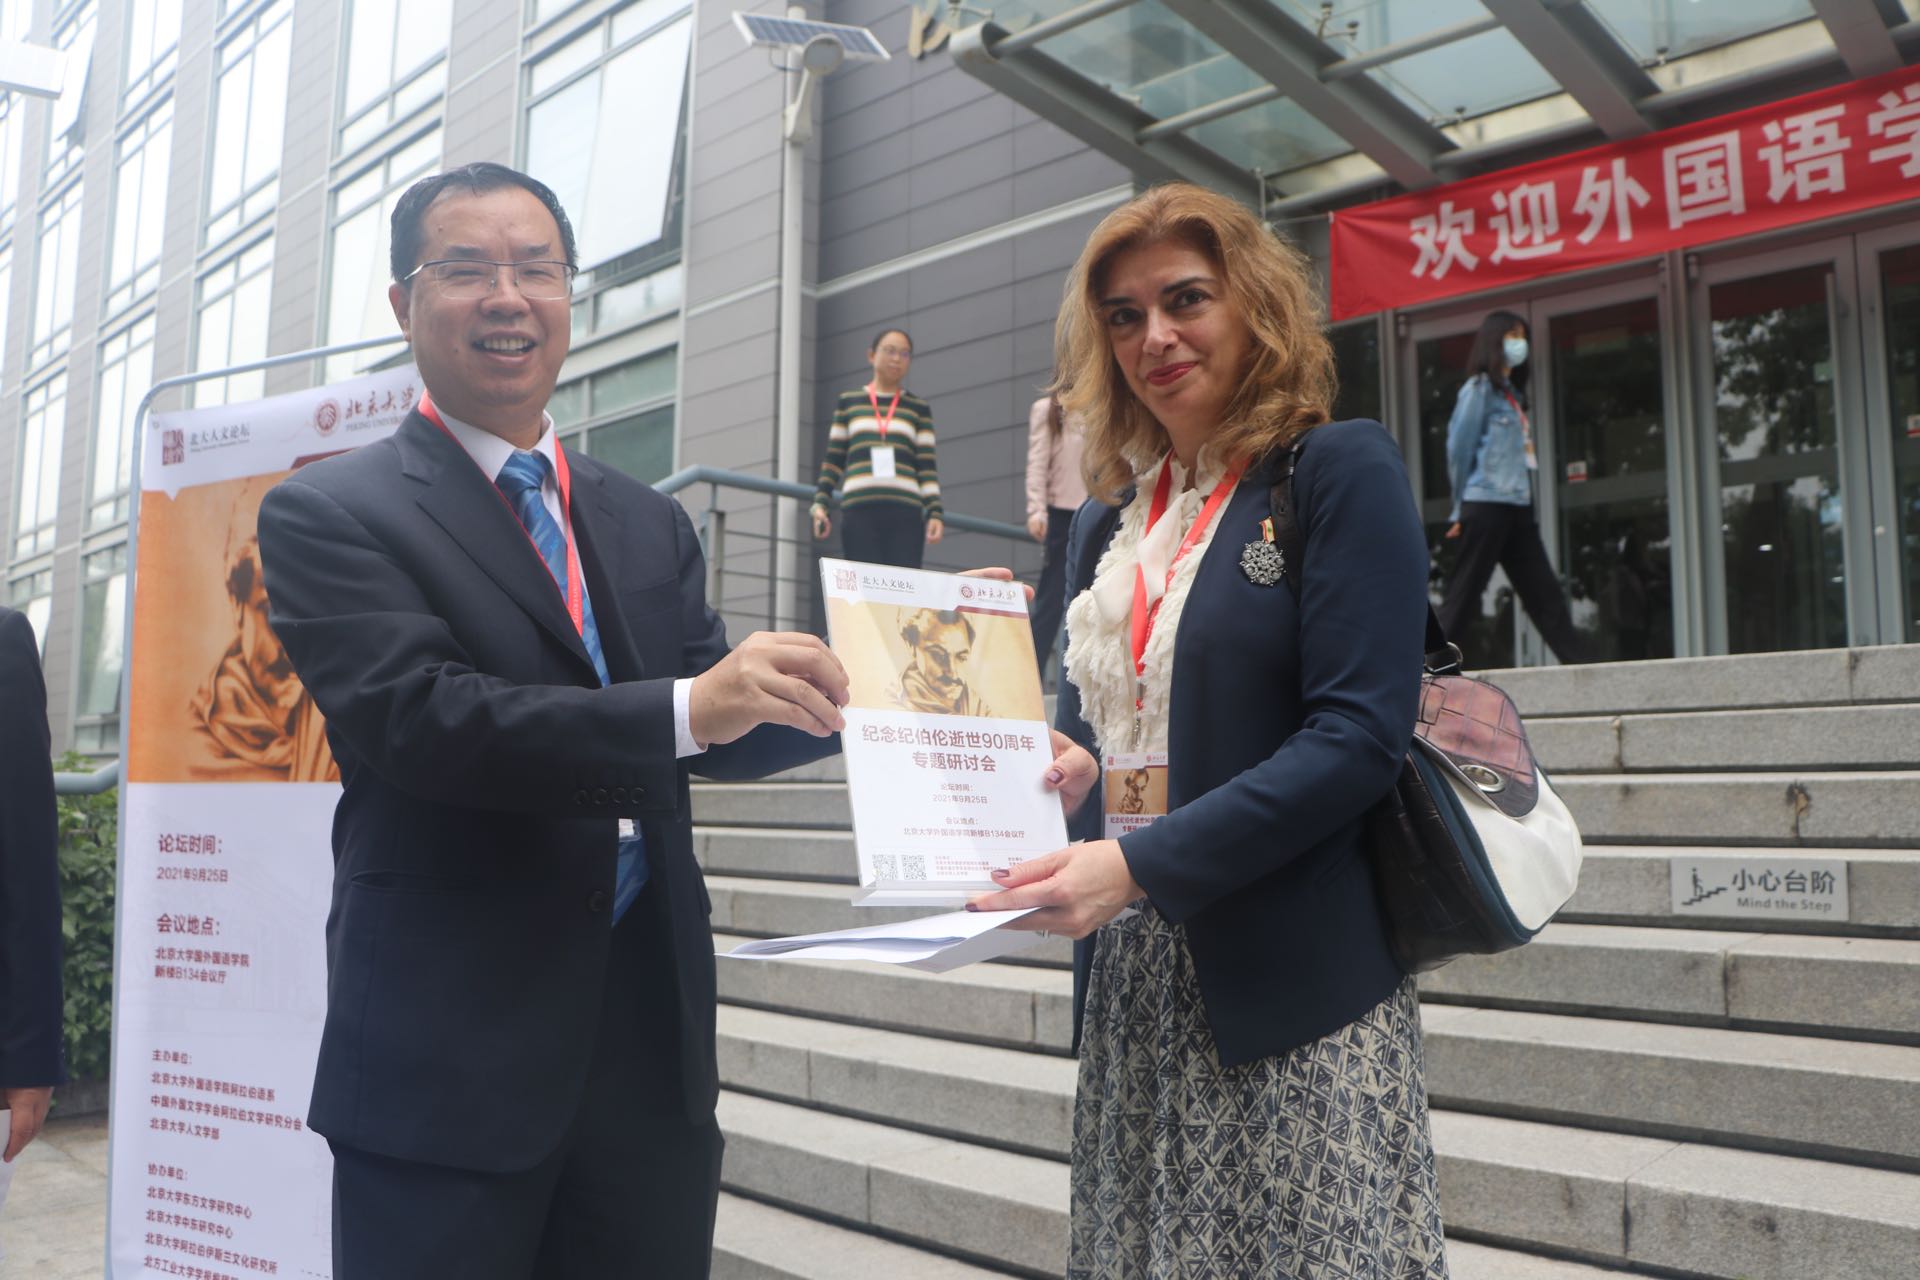 Gibran's 90th Death Anniversary in China